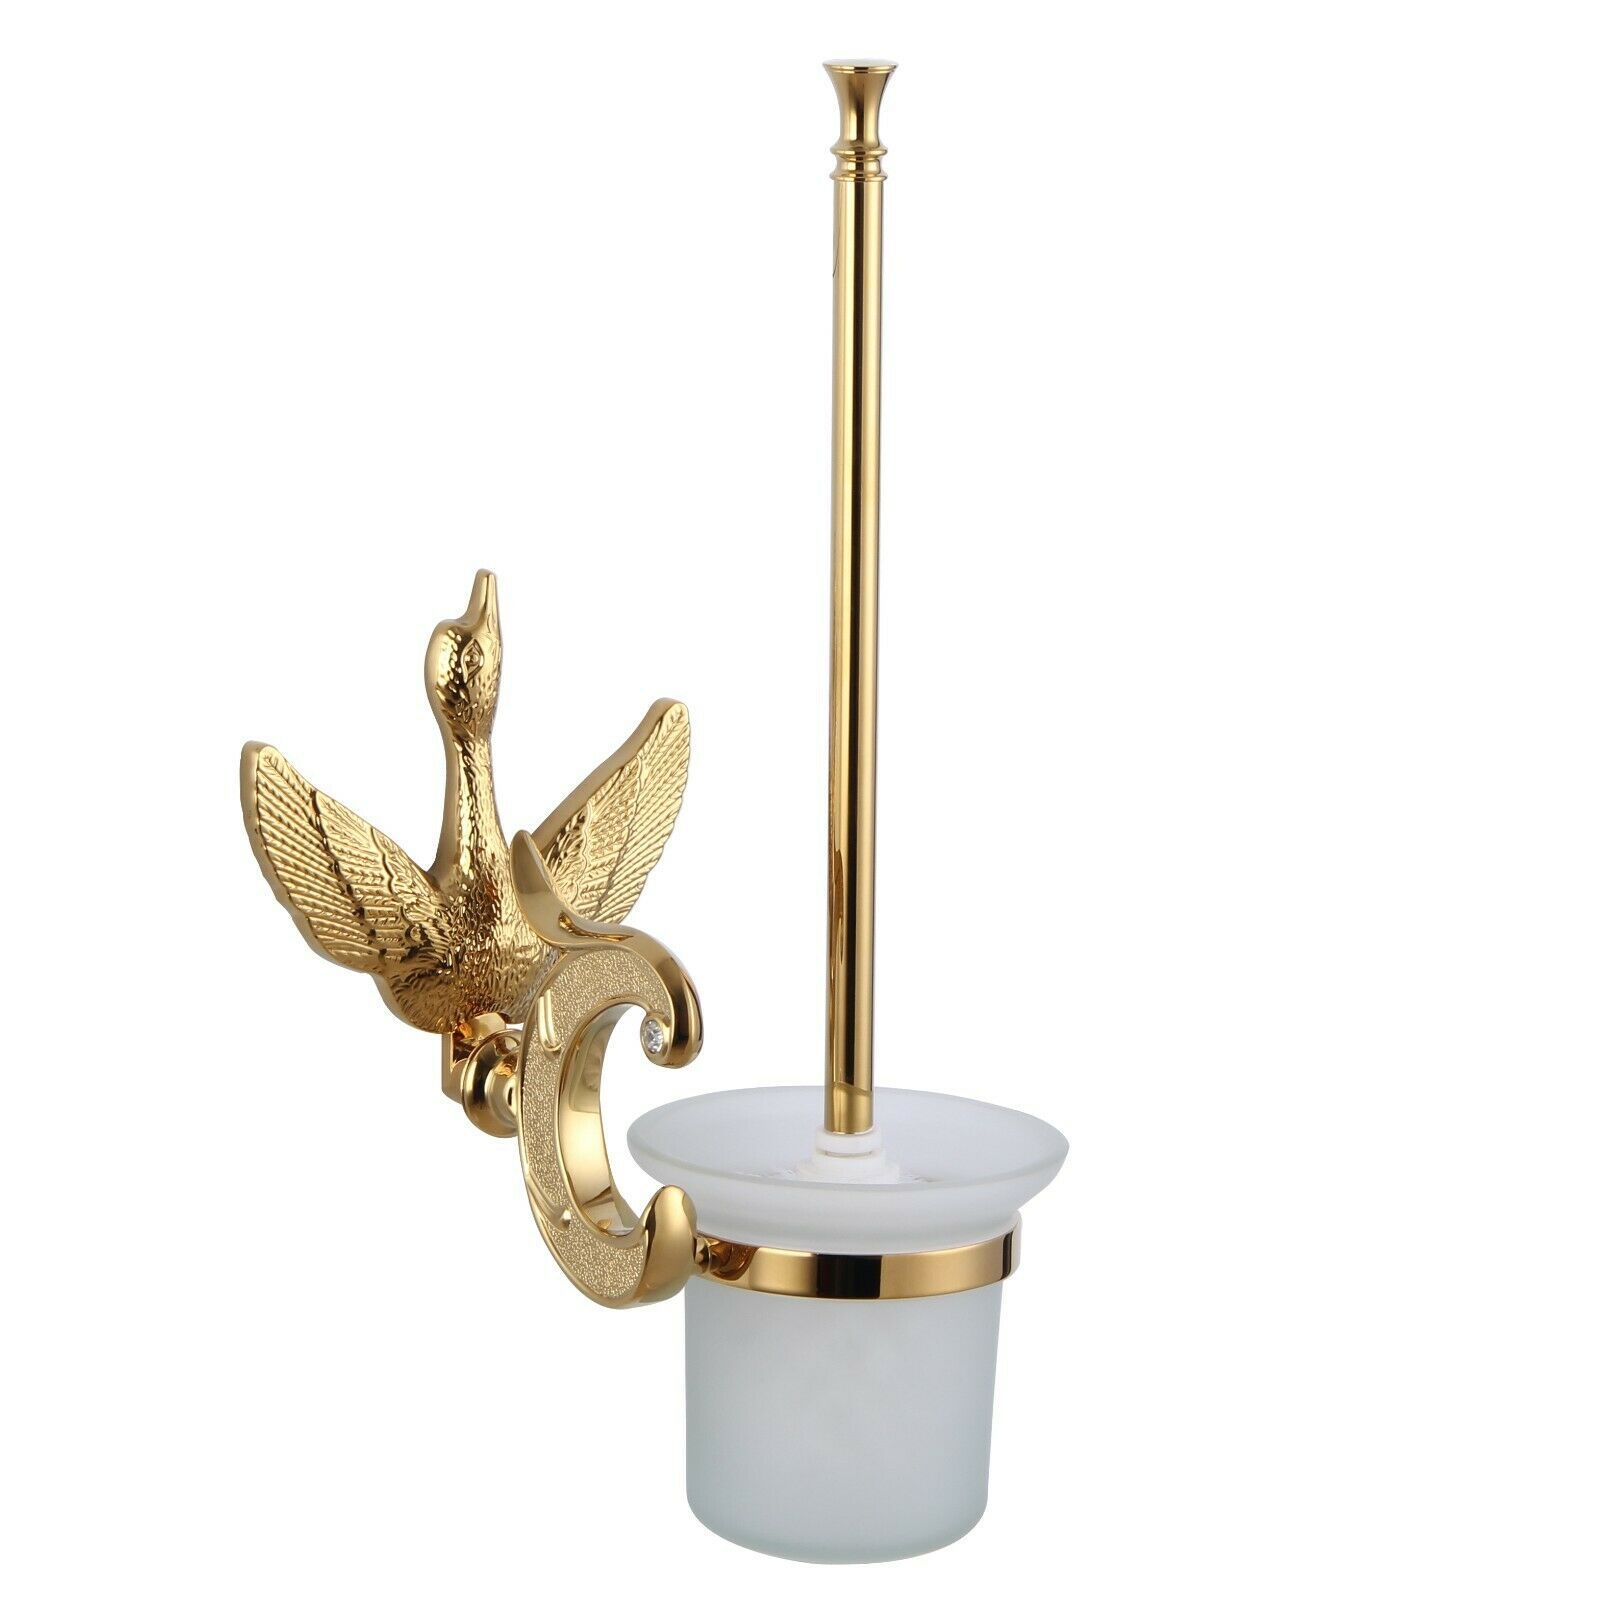 Gold Pvd Color bathroom luxury swan toilet Brush holder with Crystal - $118.89